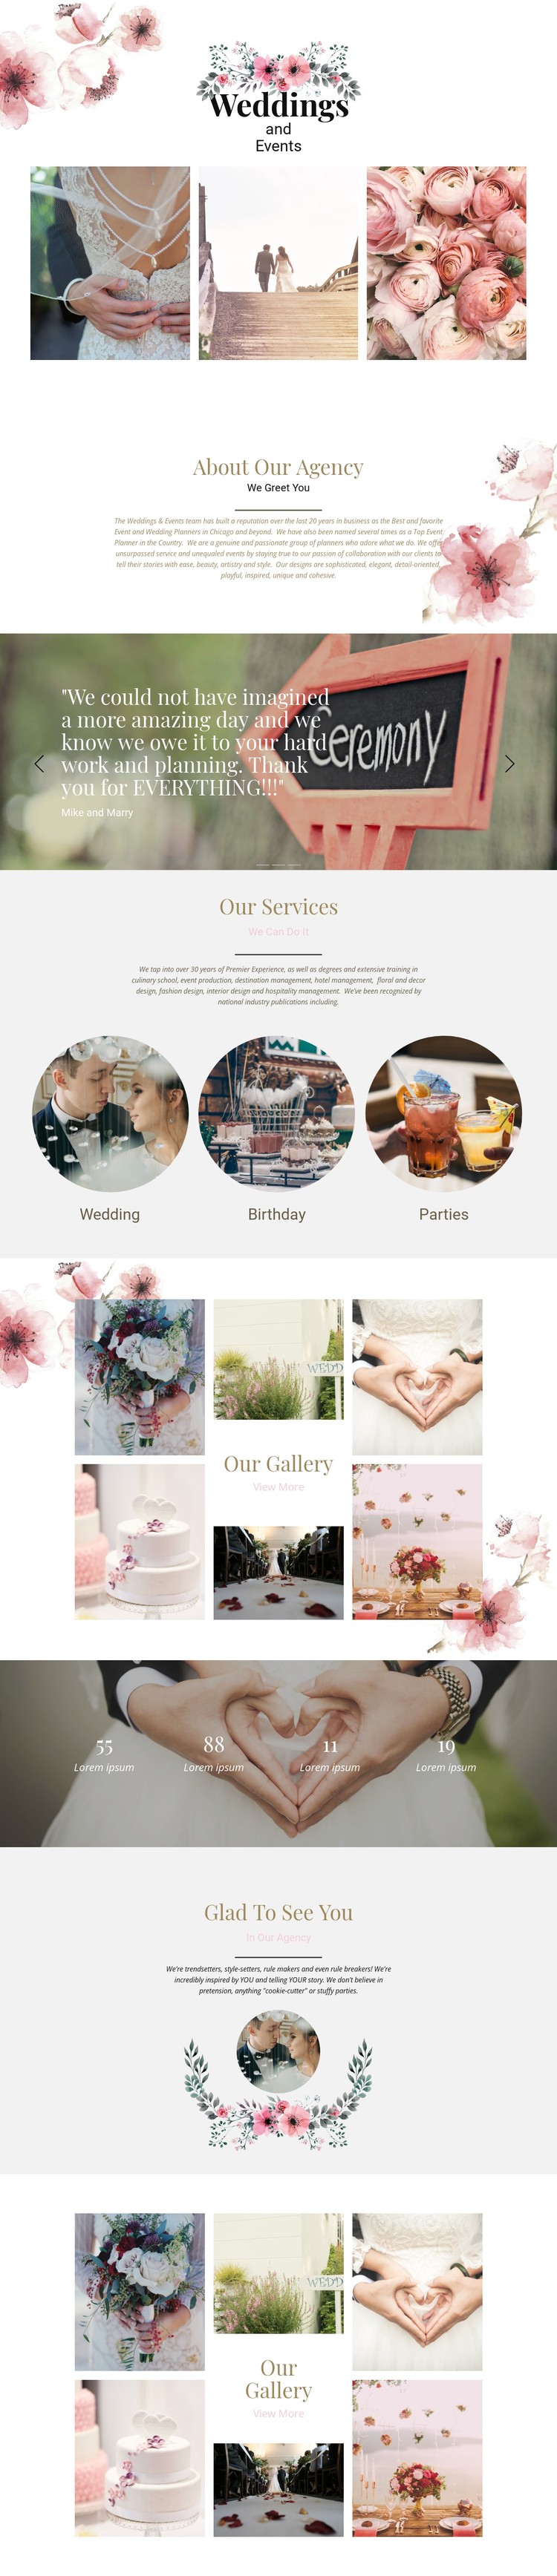 Moments of wedding CSS Template